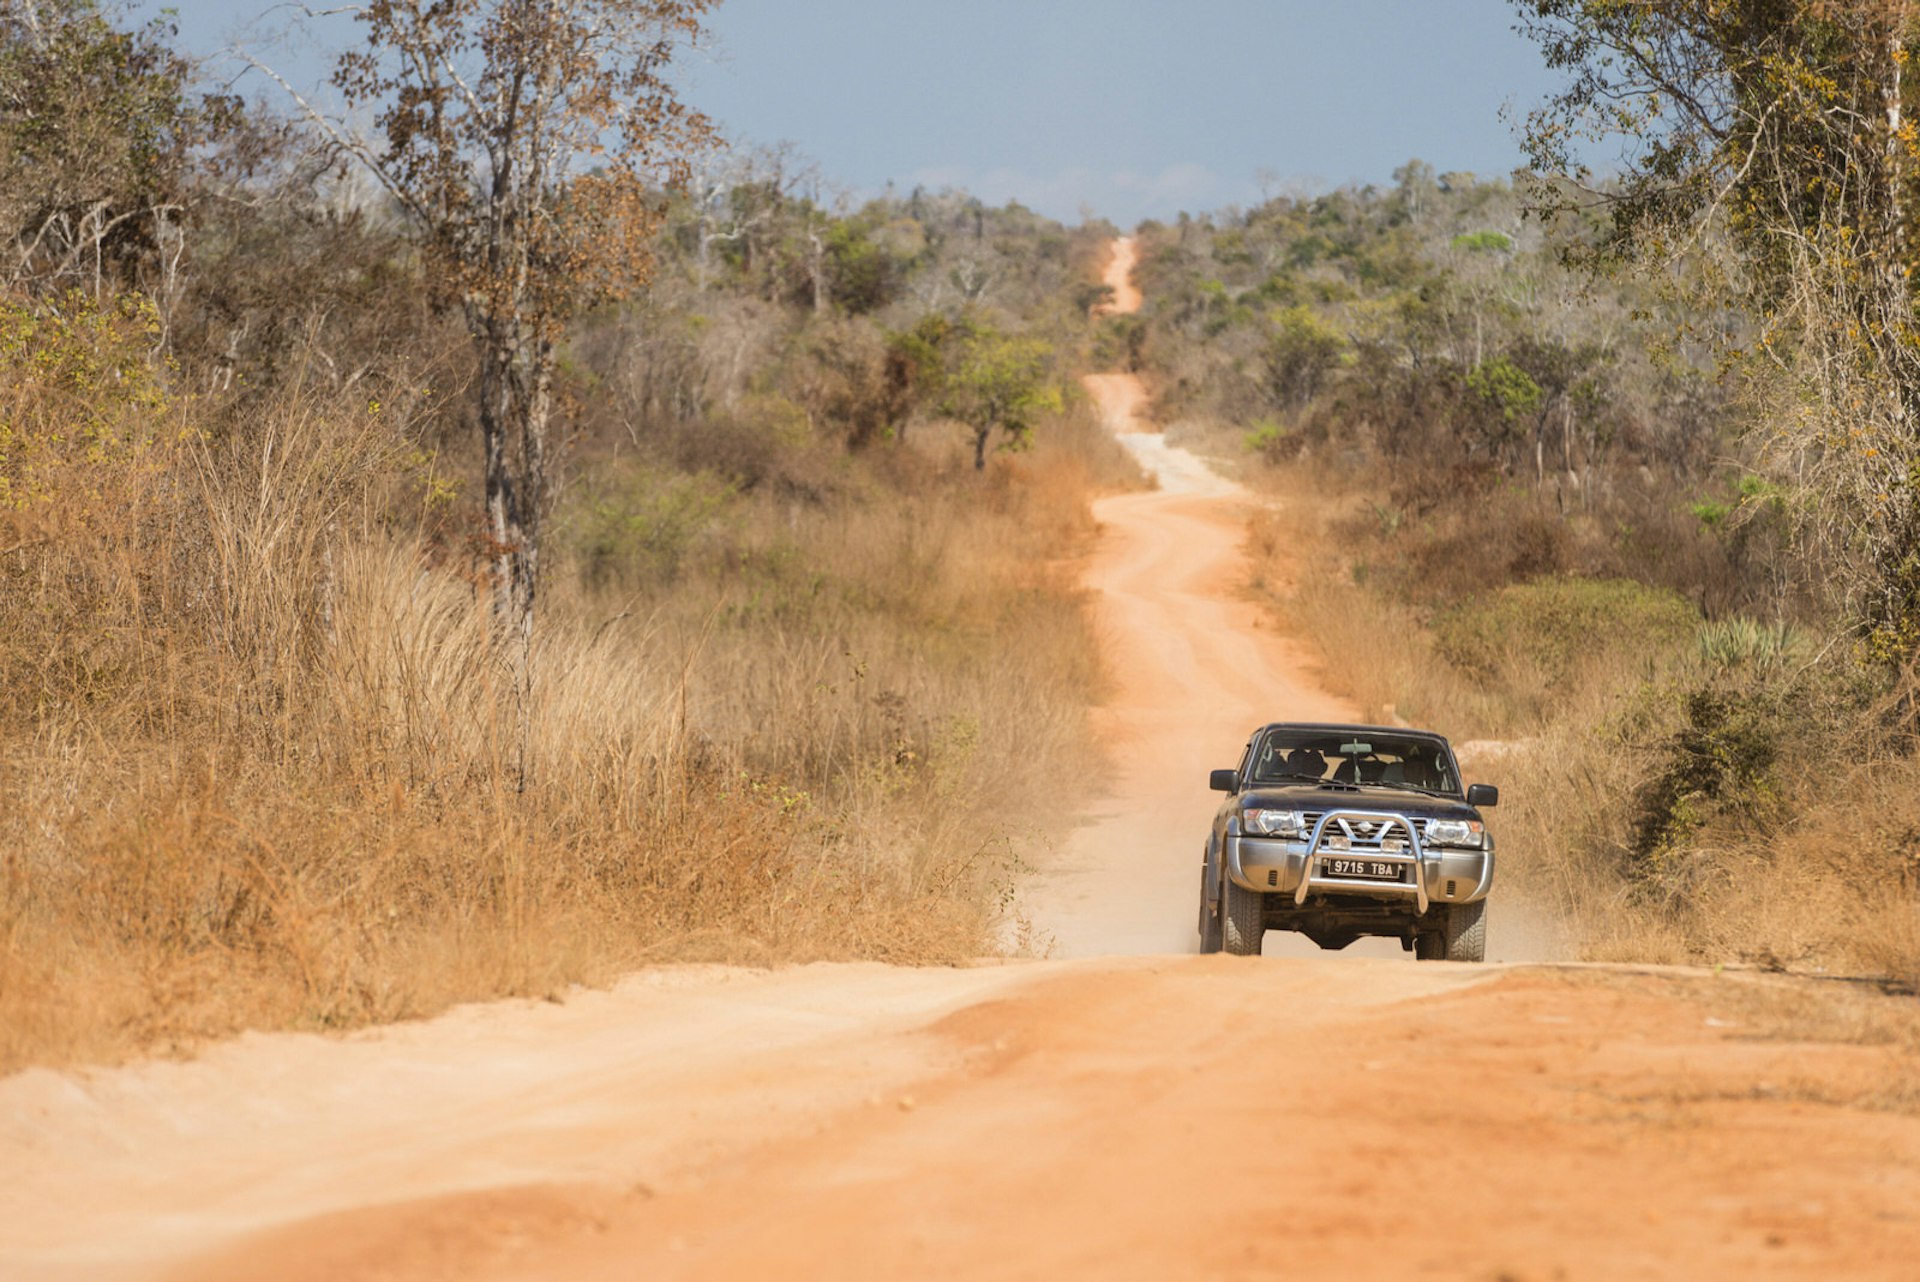 Madagascar 8a road provides a test for even the most battle-hardened vehicles © Justin Foulkes / Lonely Planet